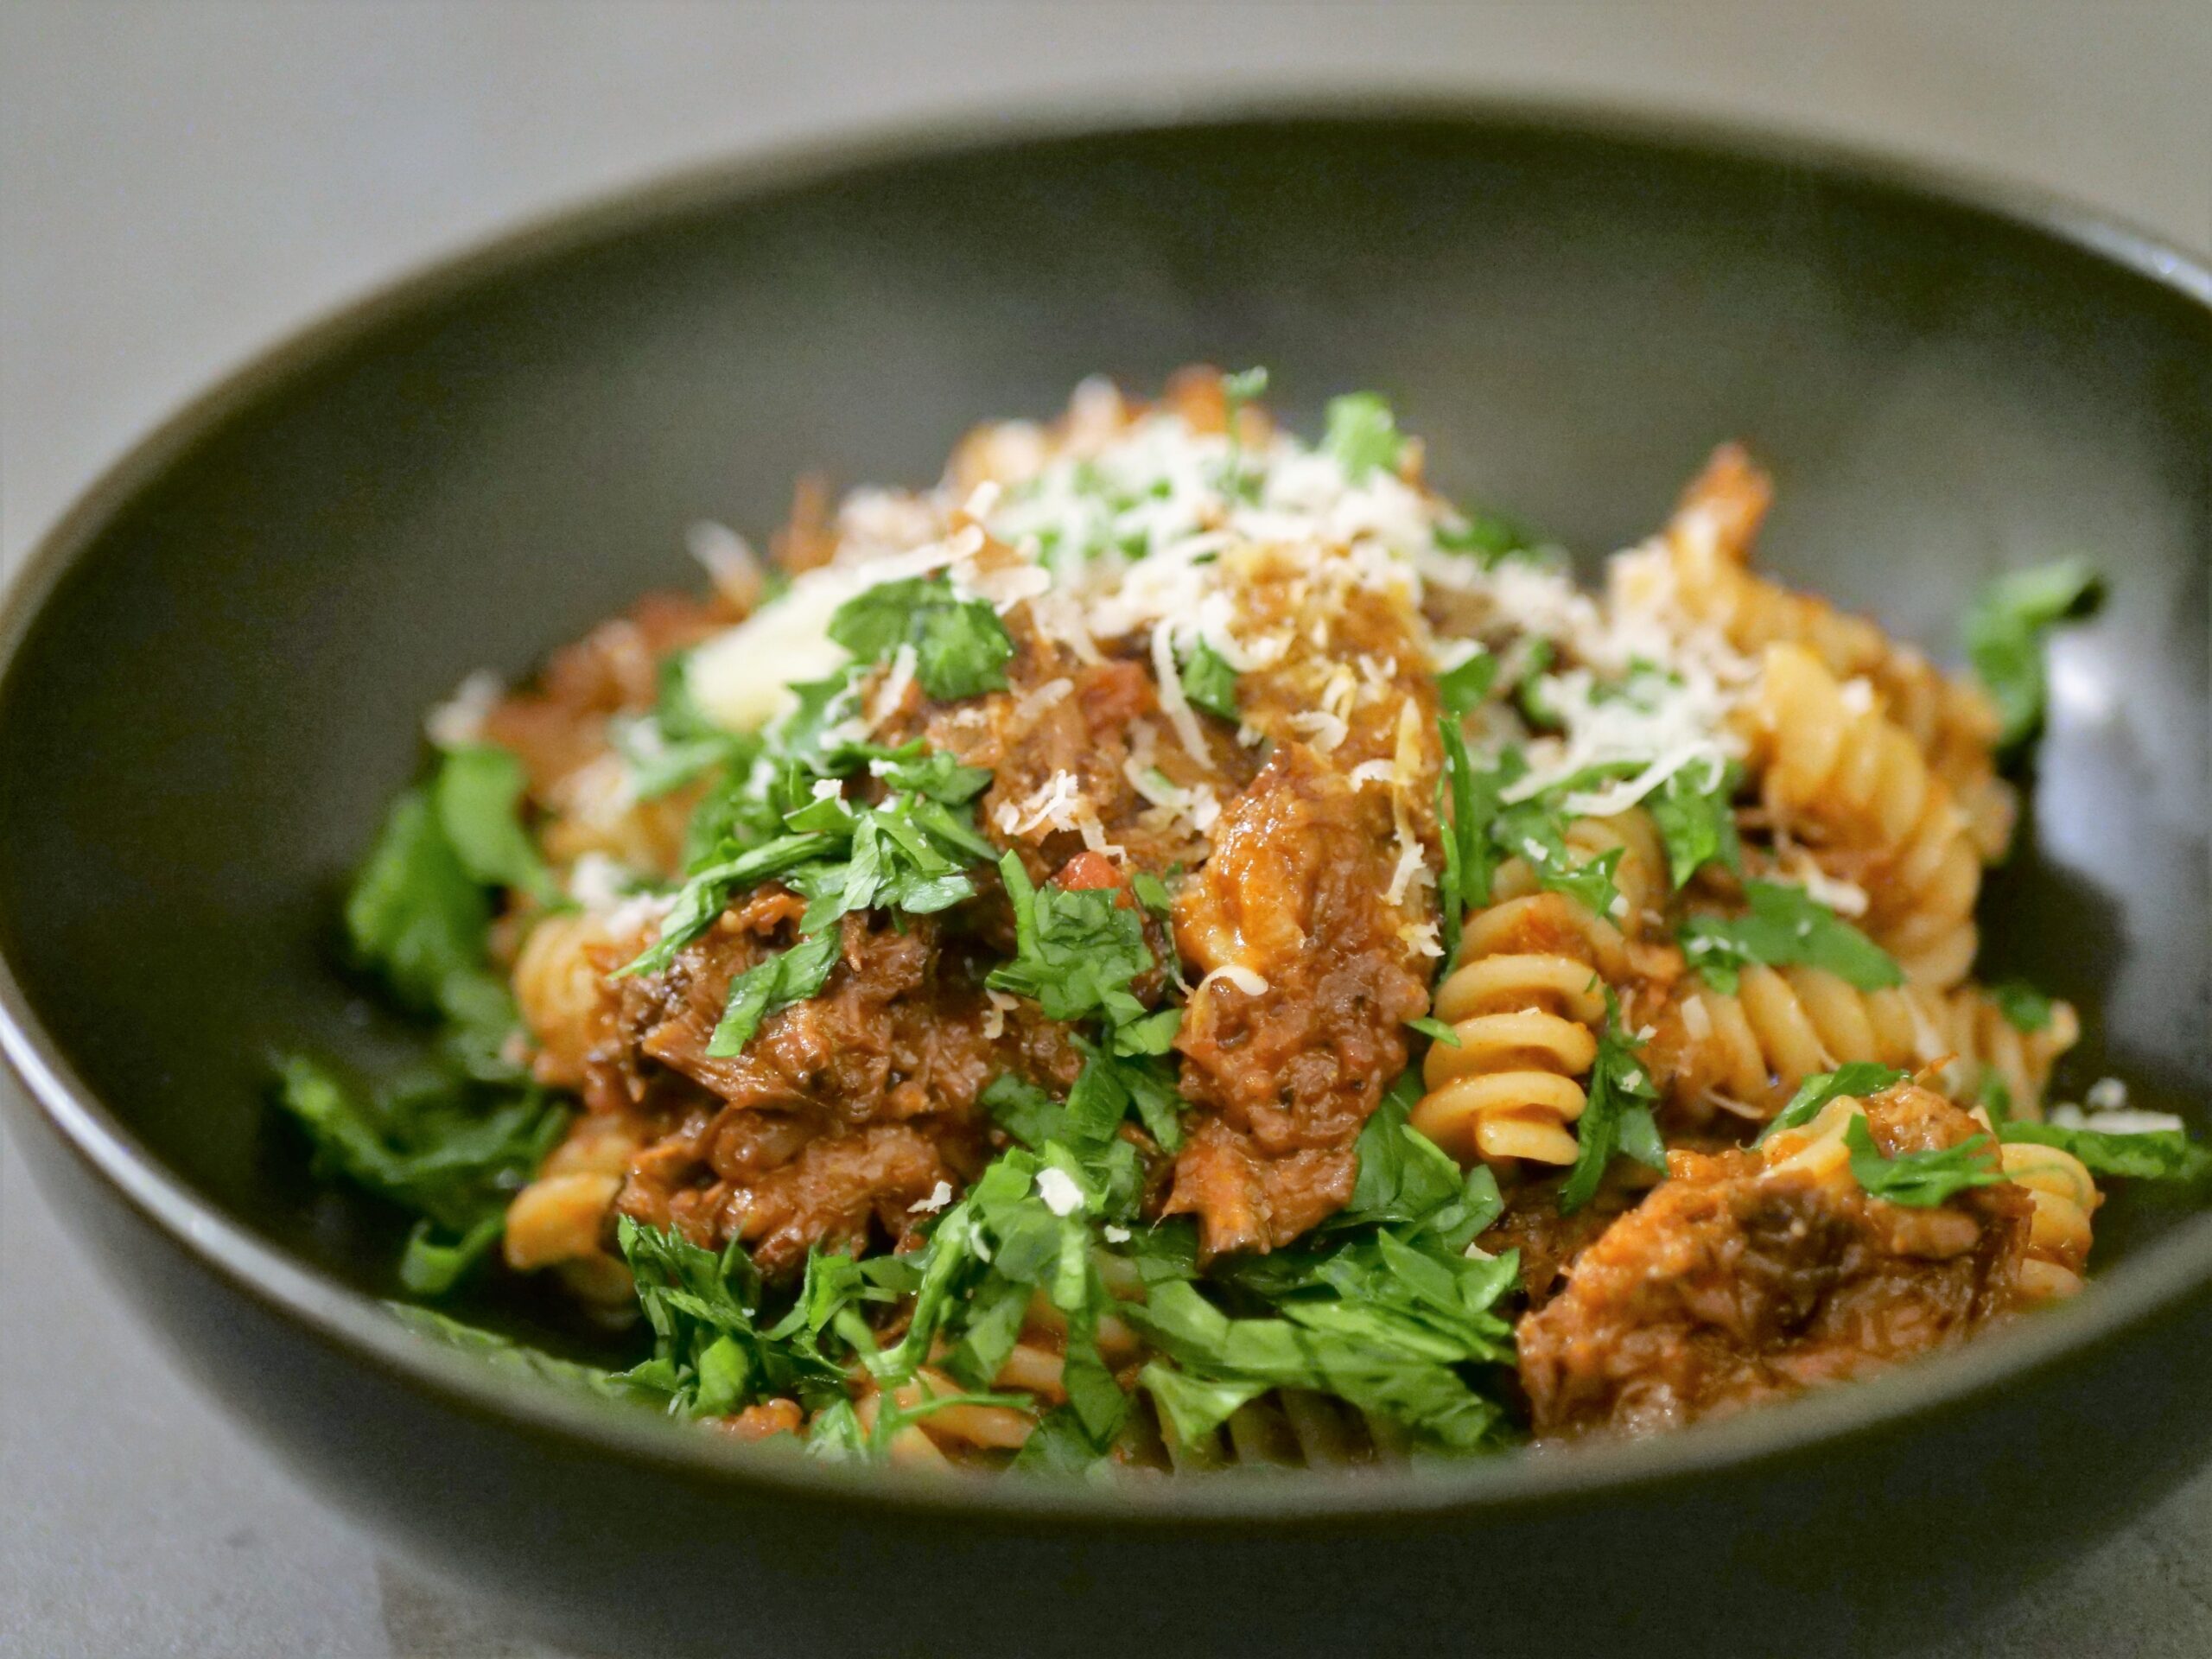 Your Favorite Pasta with An Authentic Italian Braised Oxtail Ragu Sauce